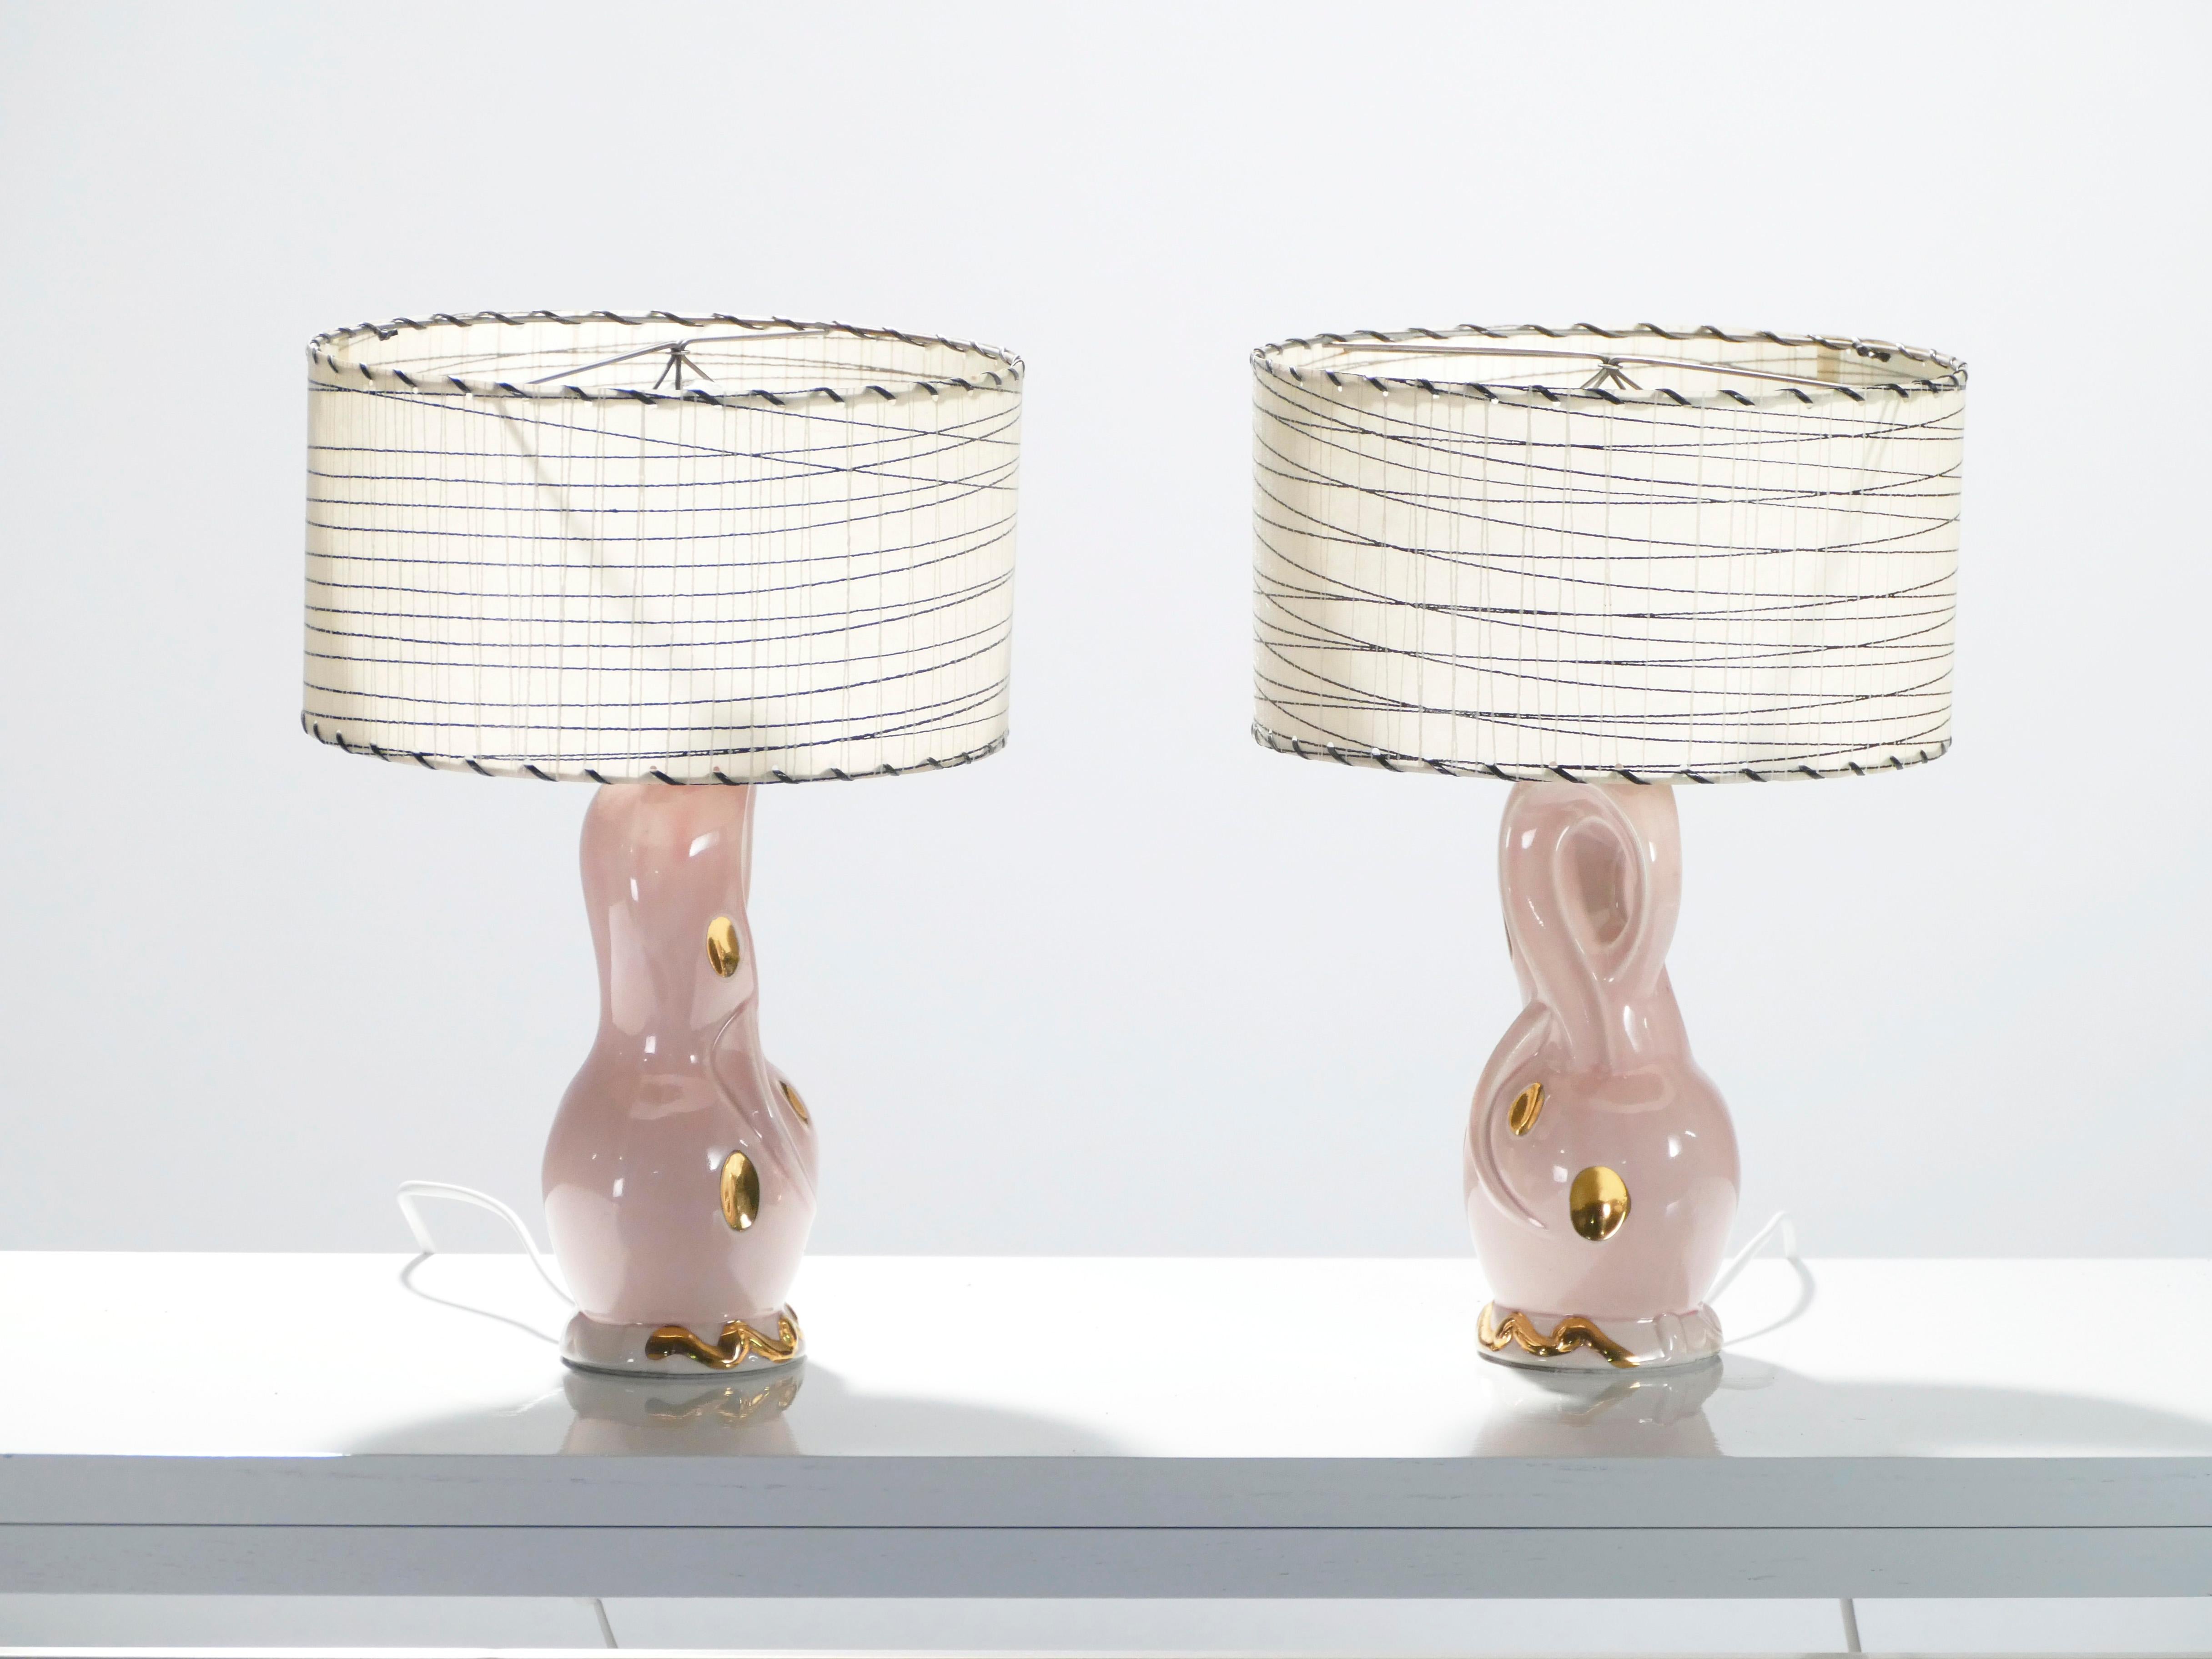 You’ll be delighted by the unexpected pops of glamour twisted into the design of these French bedside lamps. Made from light pink ceramic and with molten golden details, the pair comes with matching lampshades to help cast a cozy glow around your